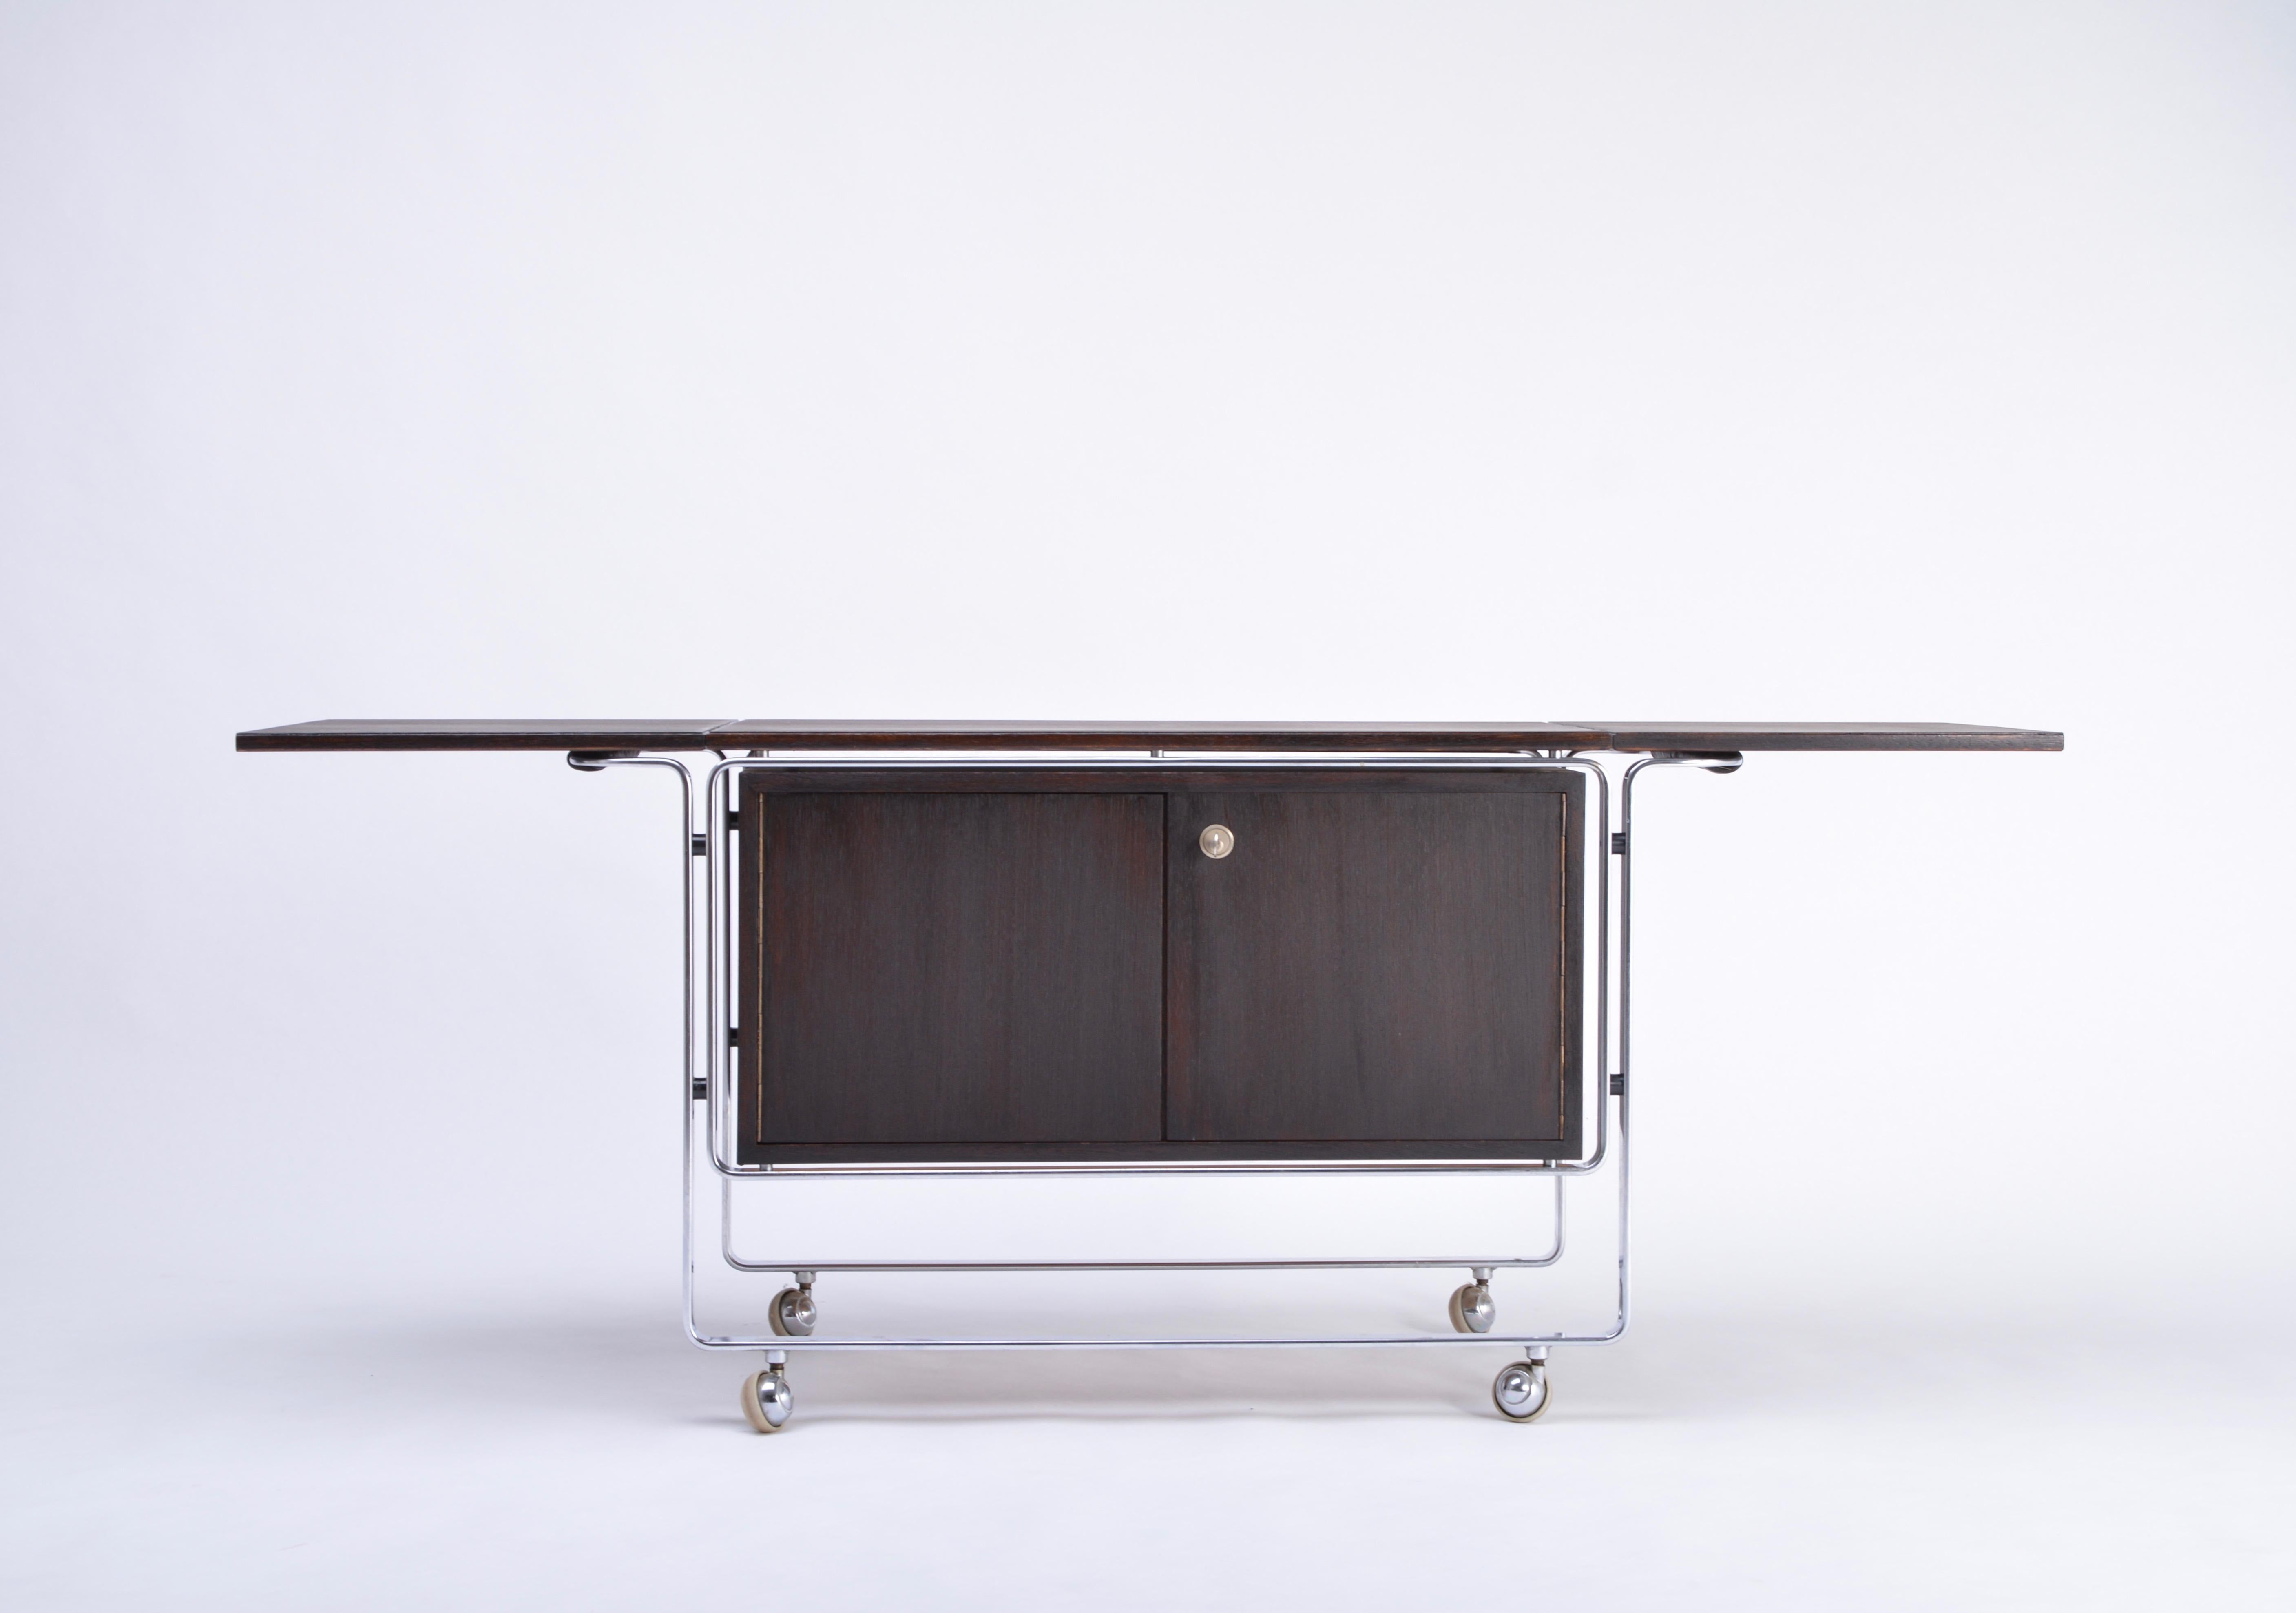 Rare bar cart designed by Horst Brüning in the 1960s and produced by Kill International. The structure is made of steel and features four wheels, the corpus is made of Wengé wood. The bar has two lockable drawers and one large compartment. The top